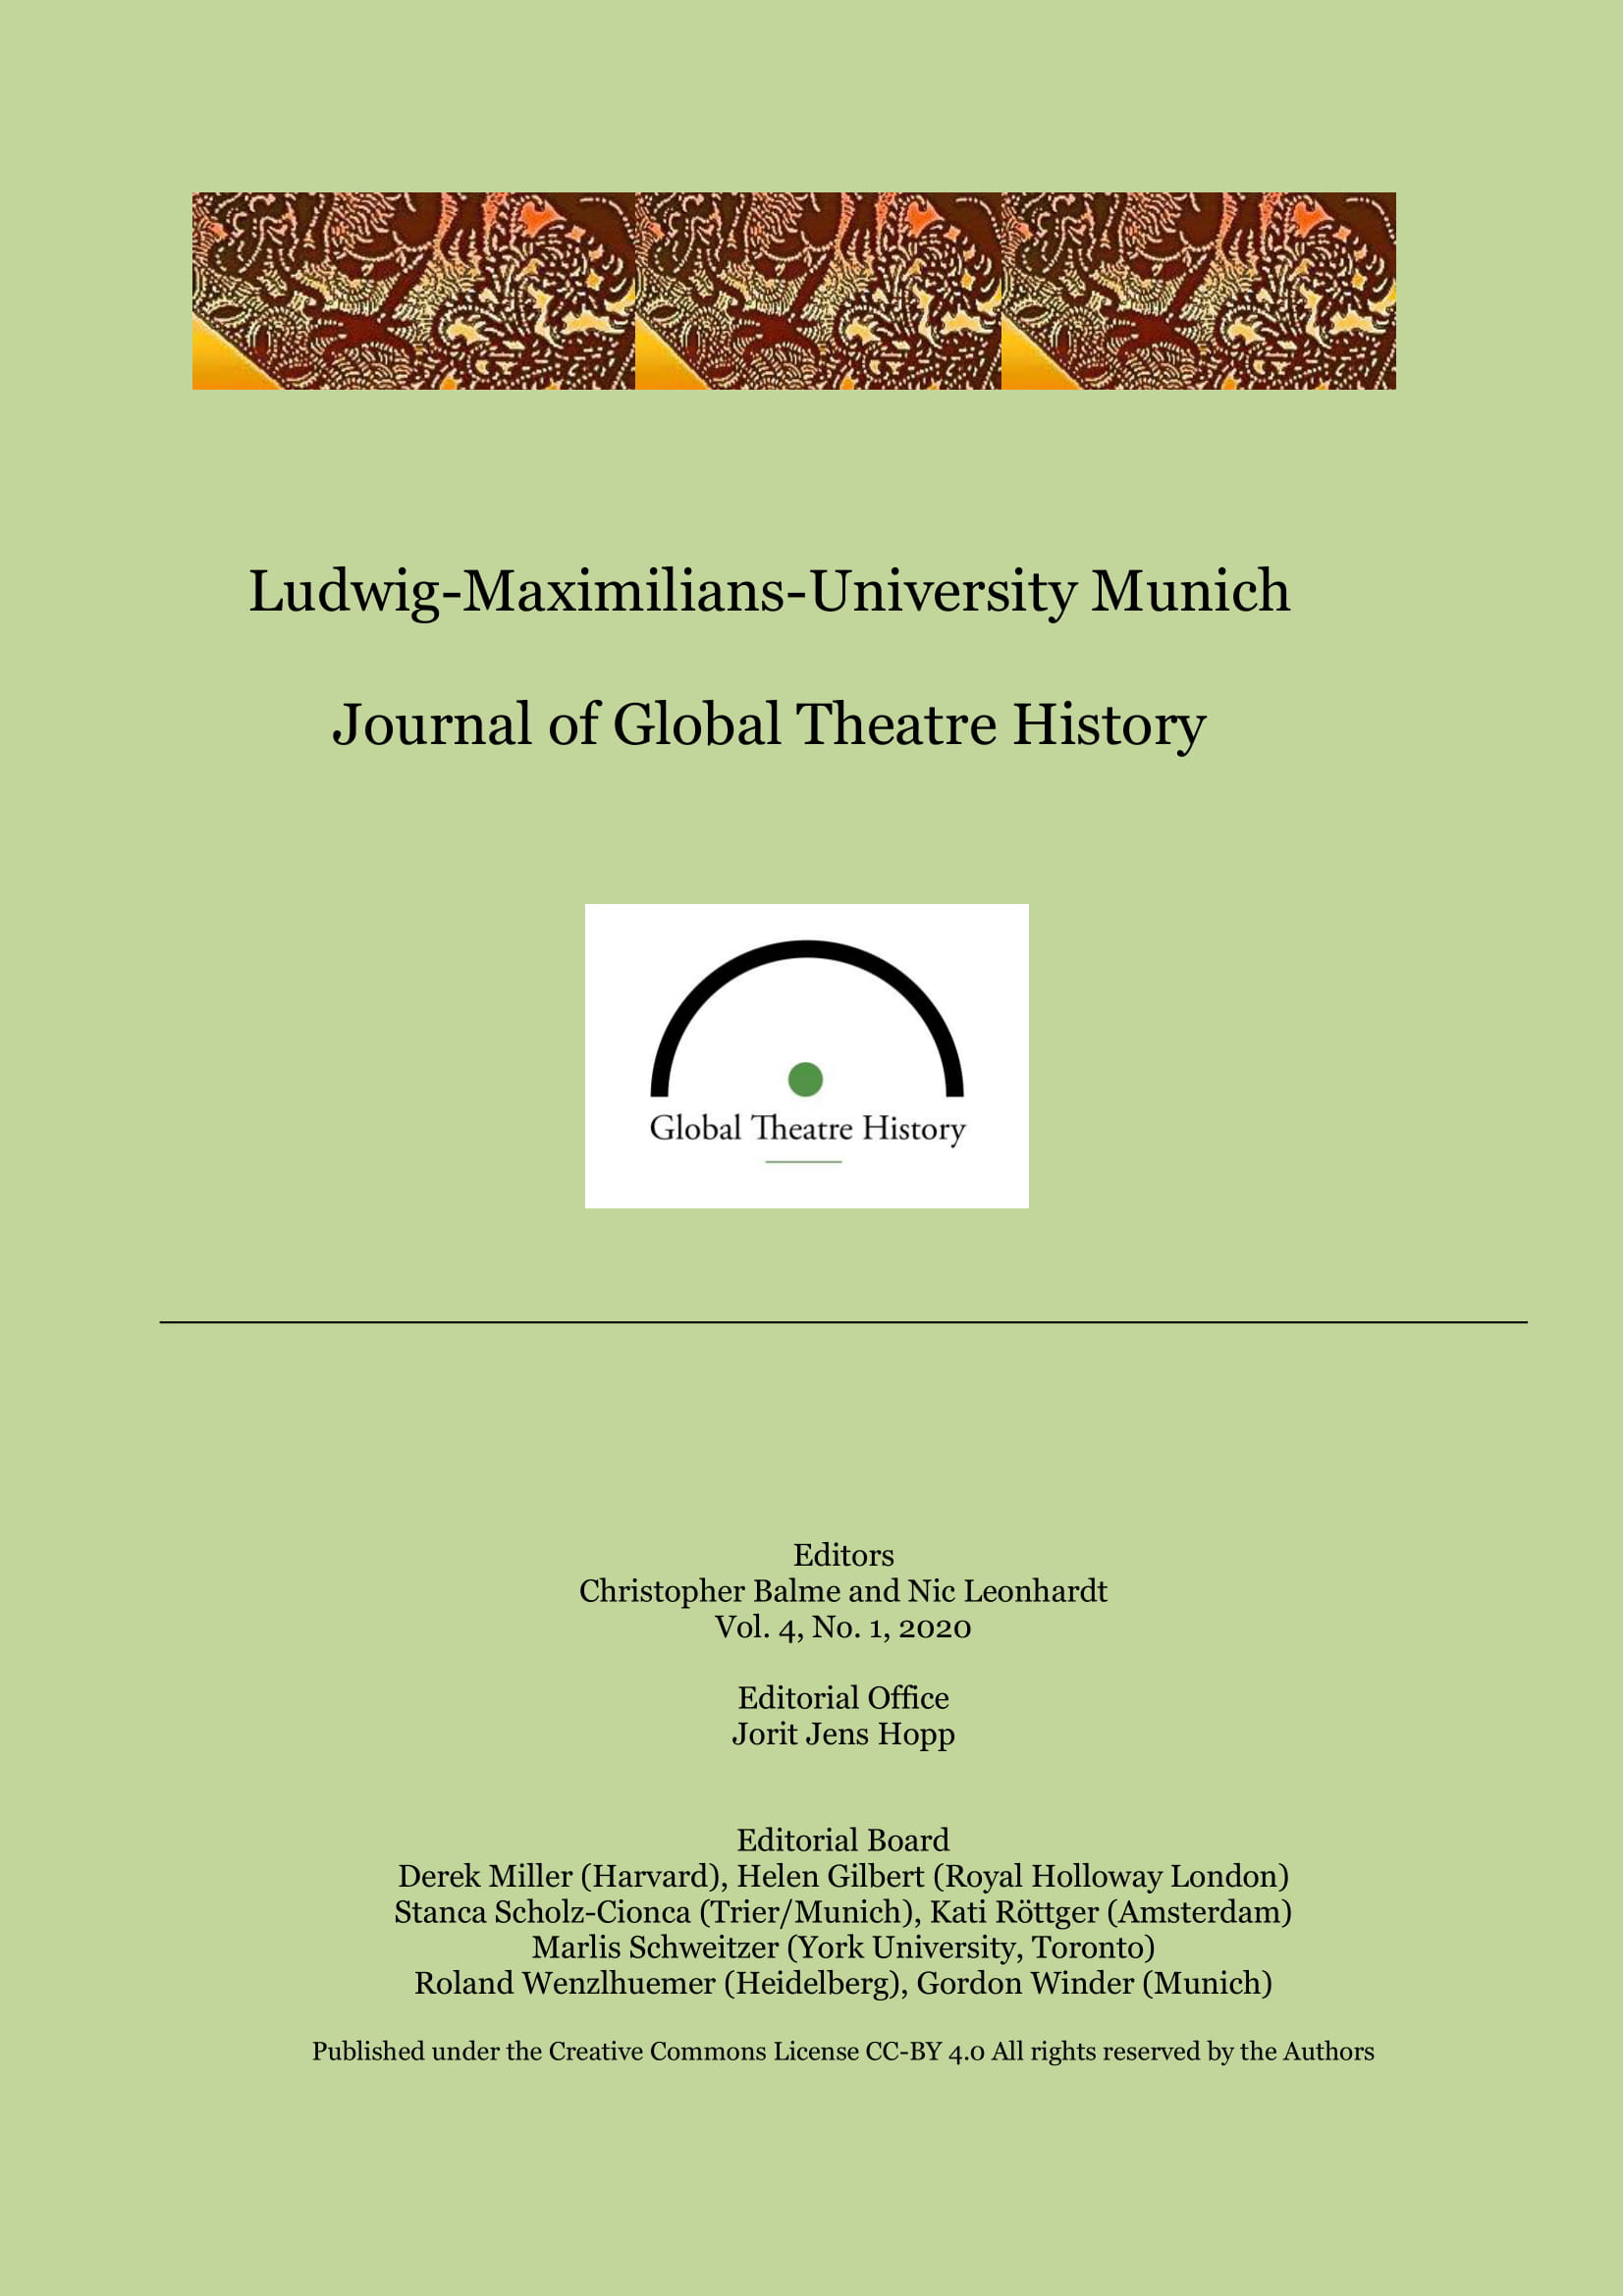 					View Vol. 4 No. 1 (2020): Journal of Global Theatre History
				